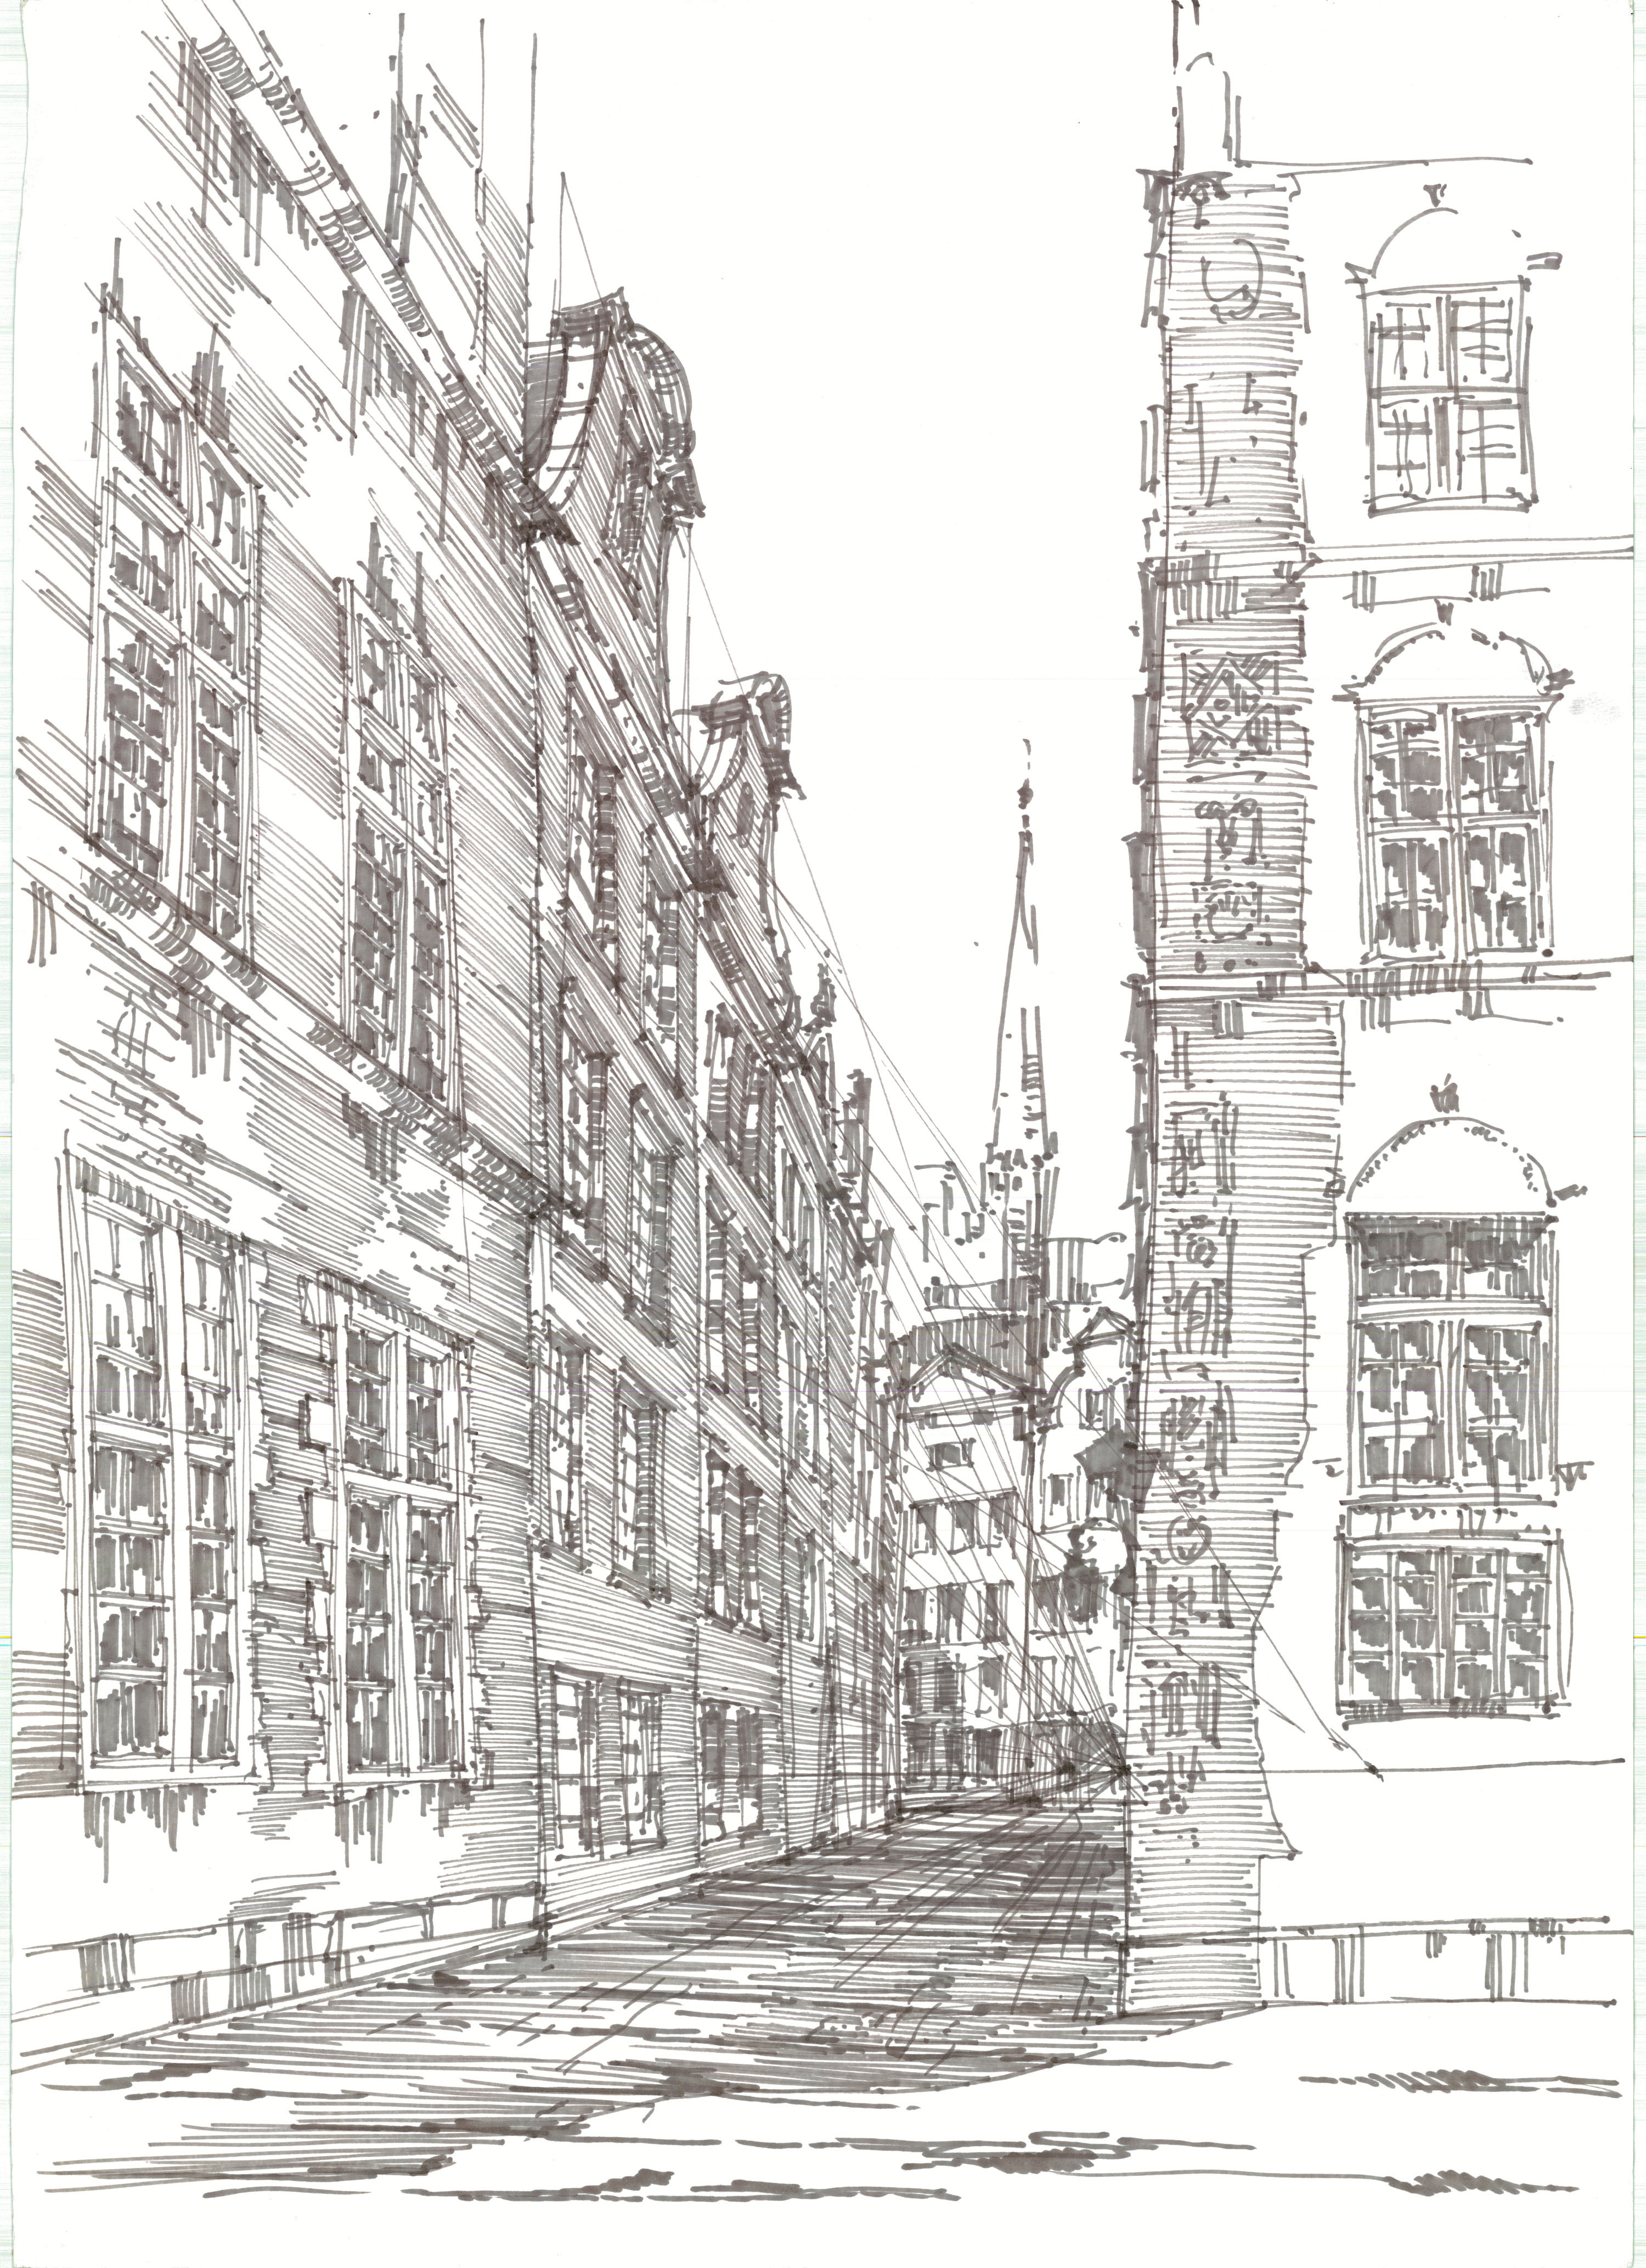 Gdańsk - Copic marker drawing 50x70cm (20x28in)